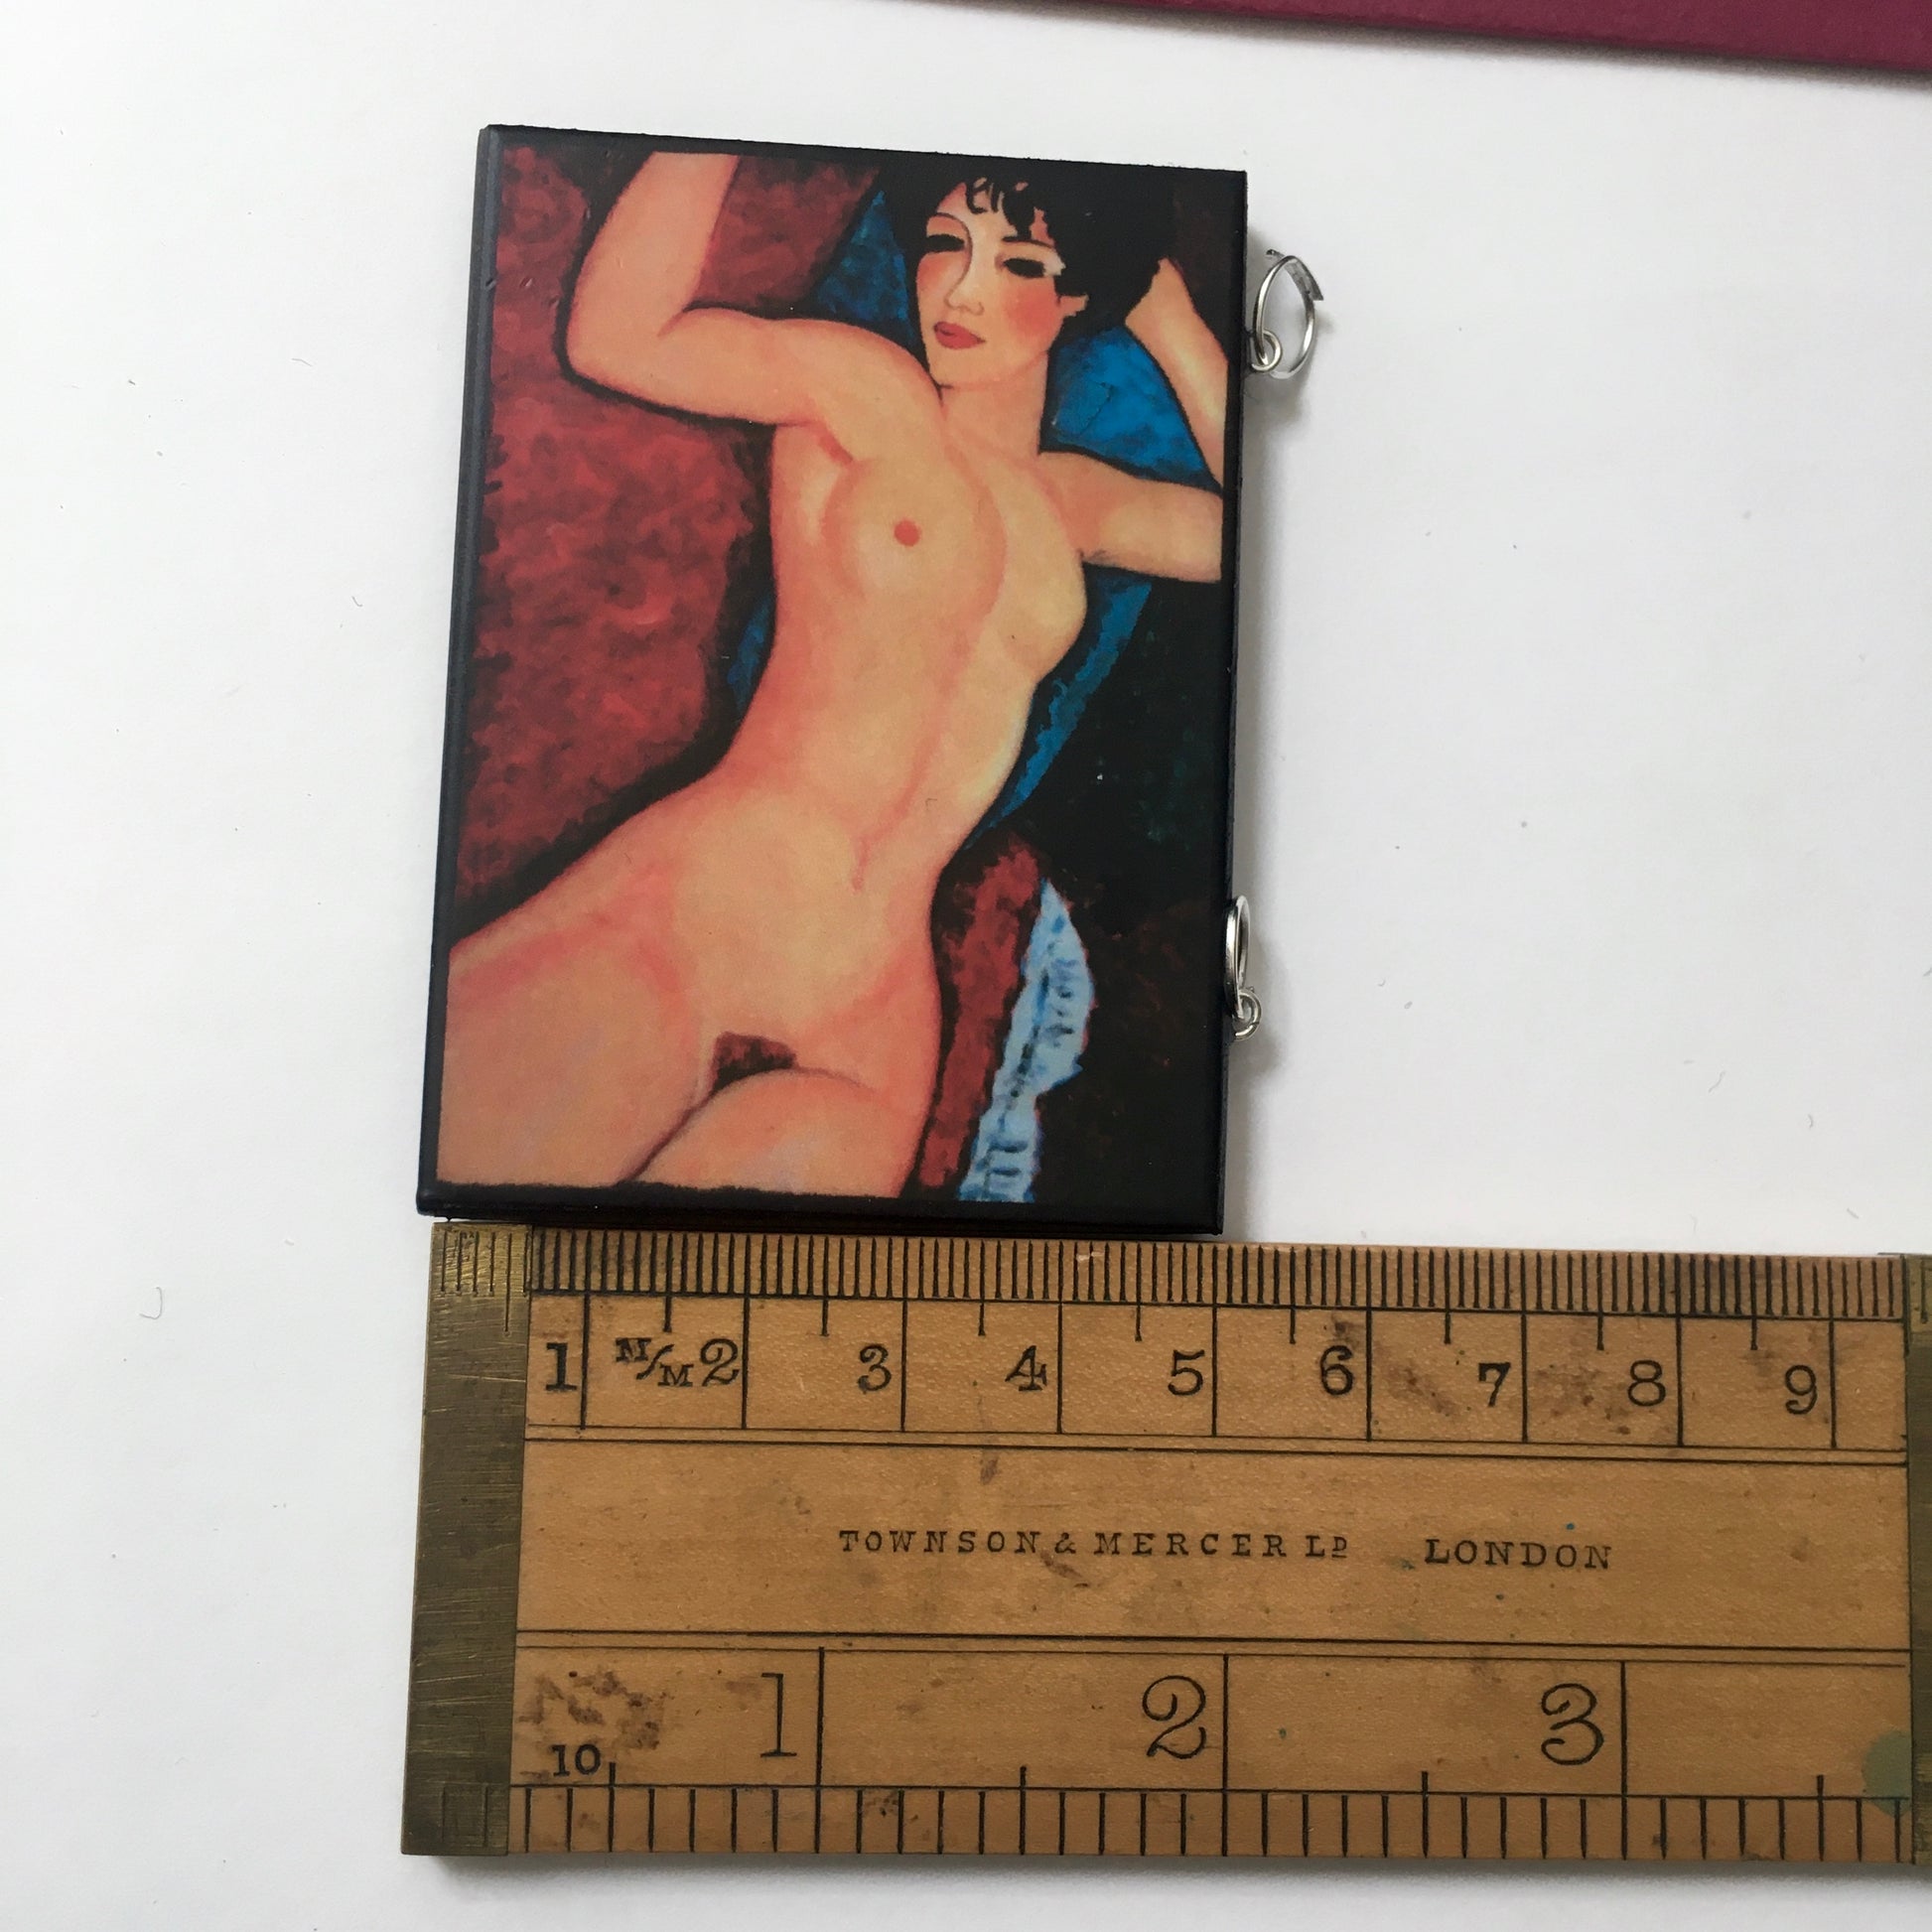 Pendant with an art detail of the sensual nude woman painting by Modigliani. The wooden, rectangular pendant near a rule shows the dimensions of 5 cm 